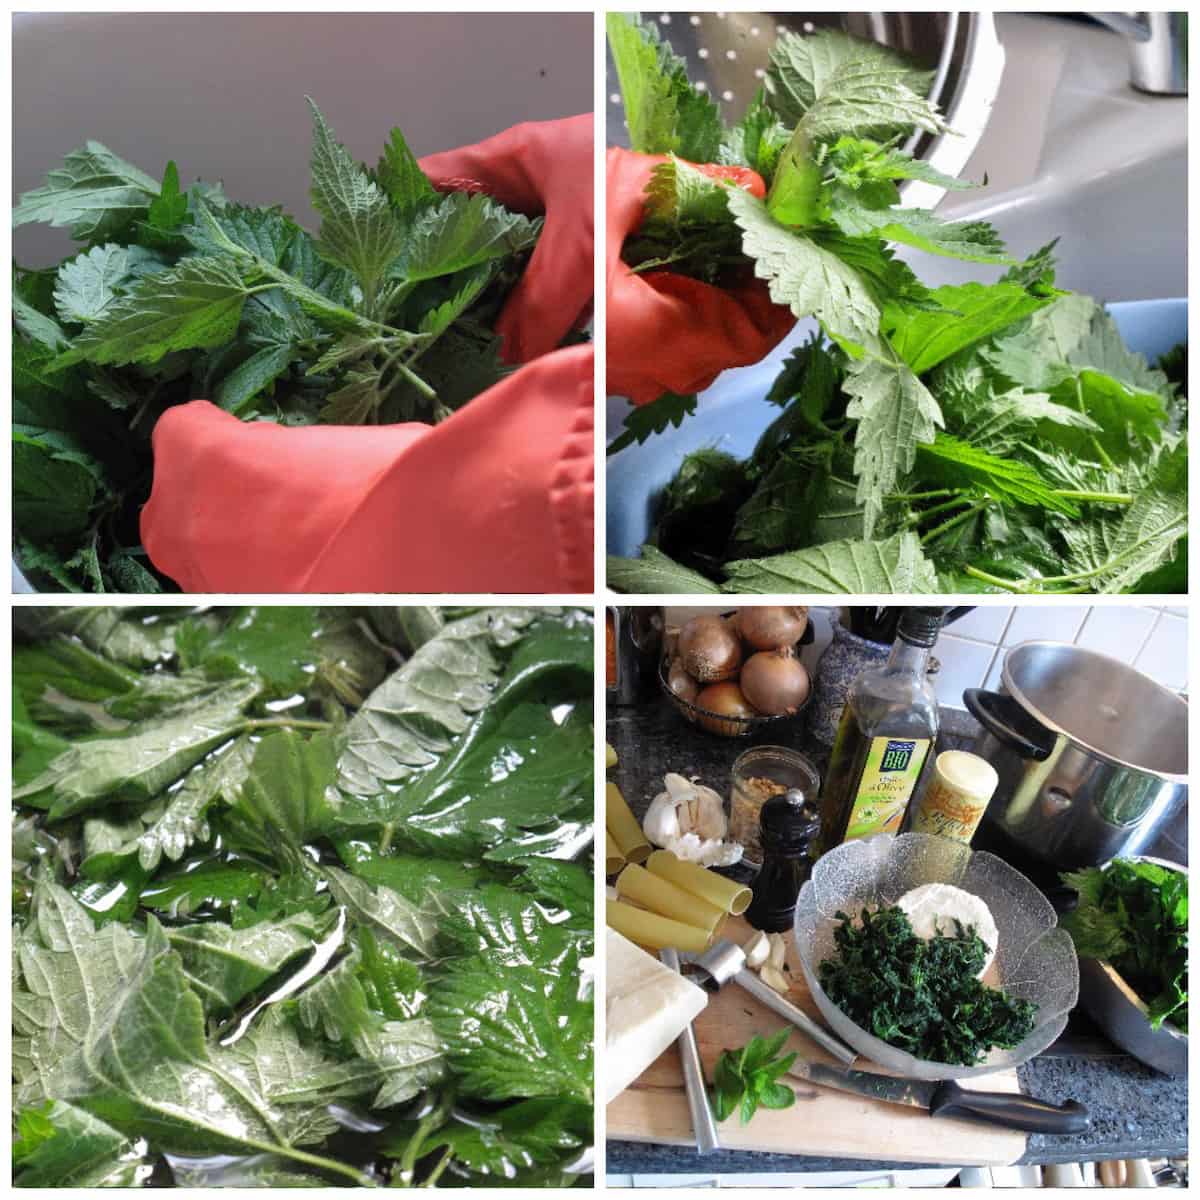 washing nettles with gloves and blanching